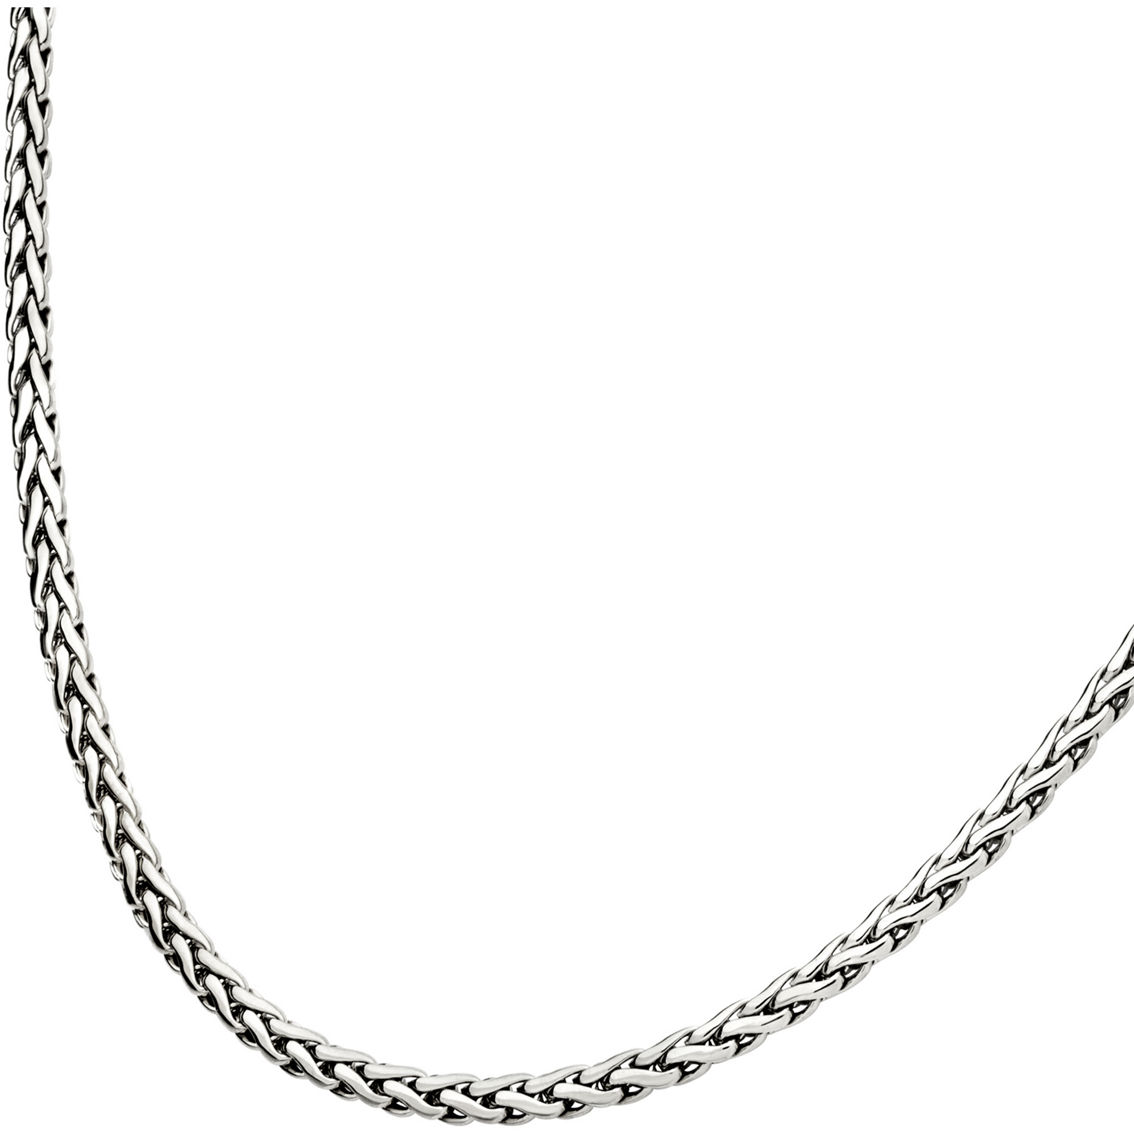 Inox Polished Finish Stainless Steel Spiga Chain Necklace - Image 3 of 4